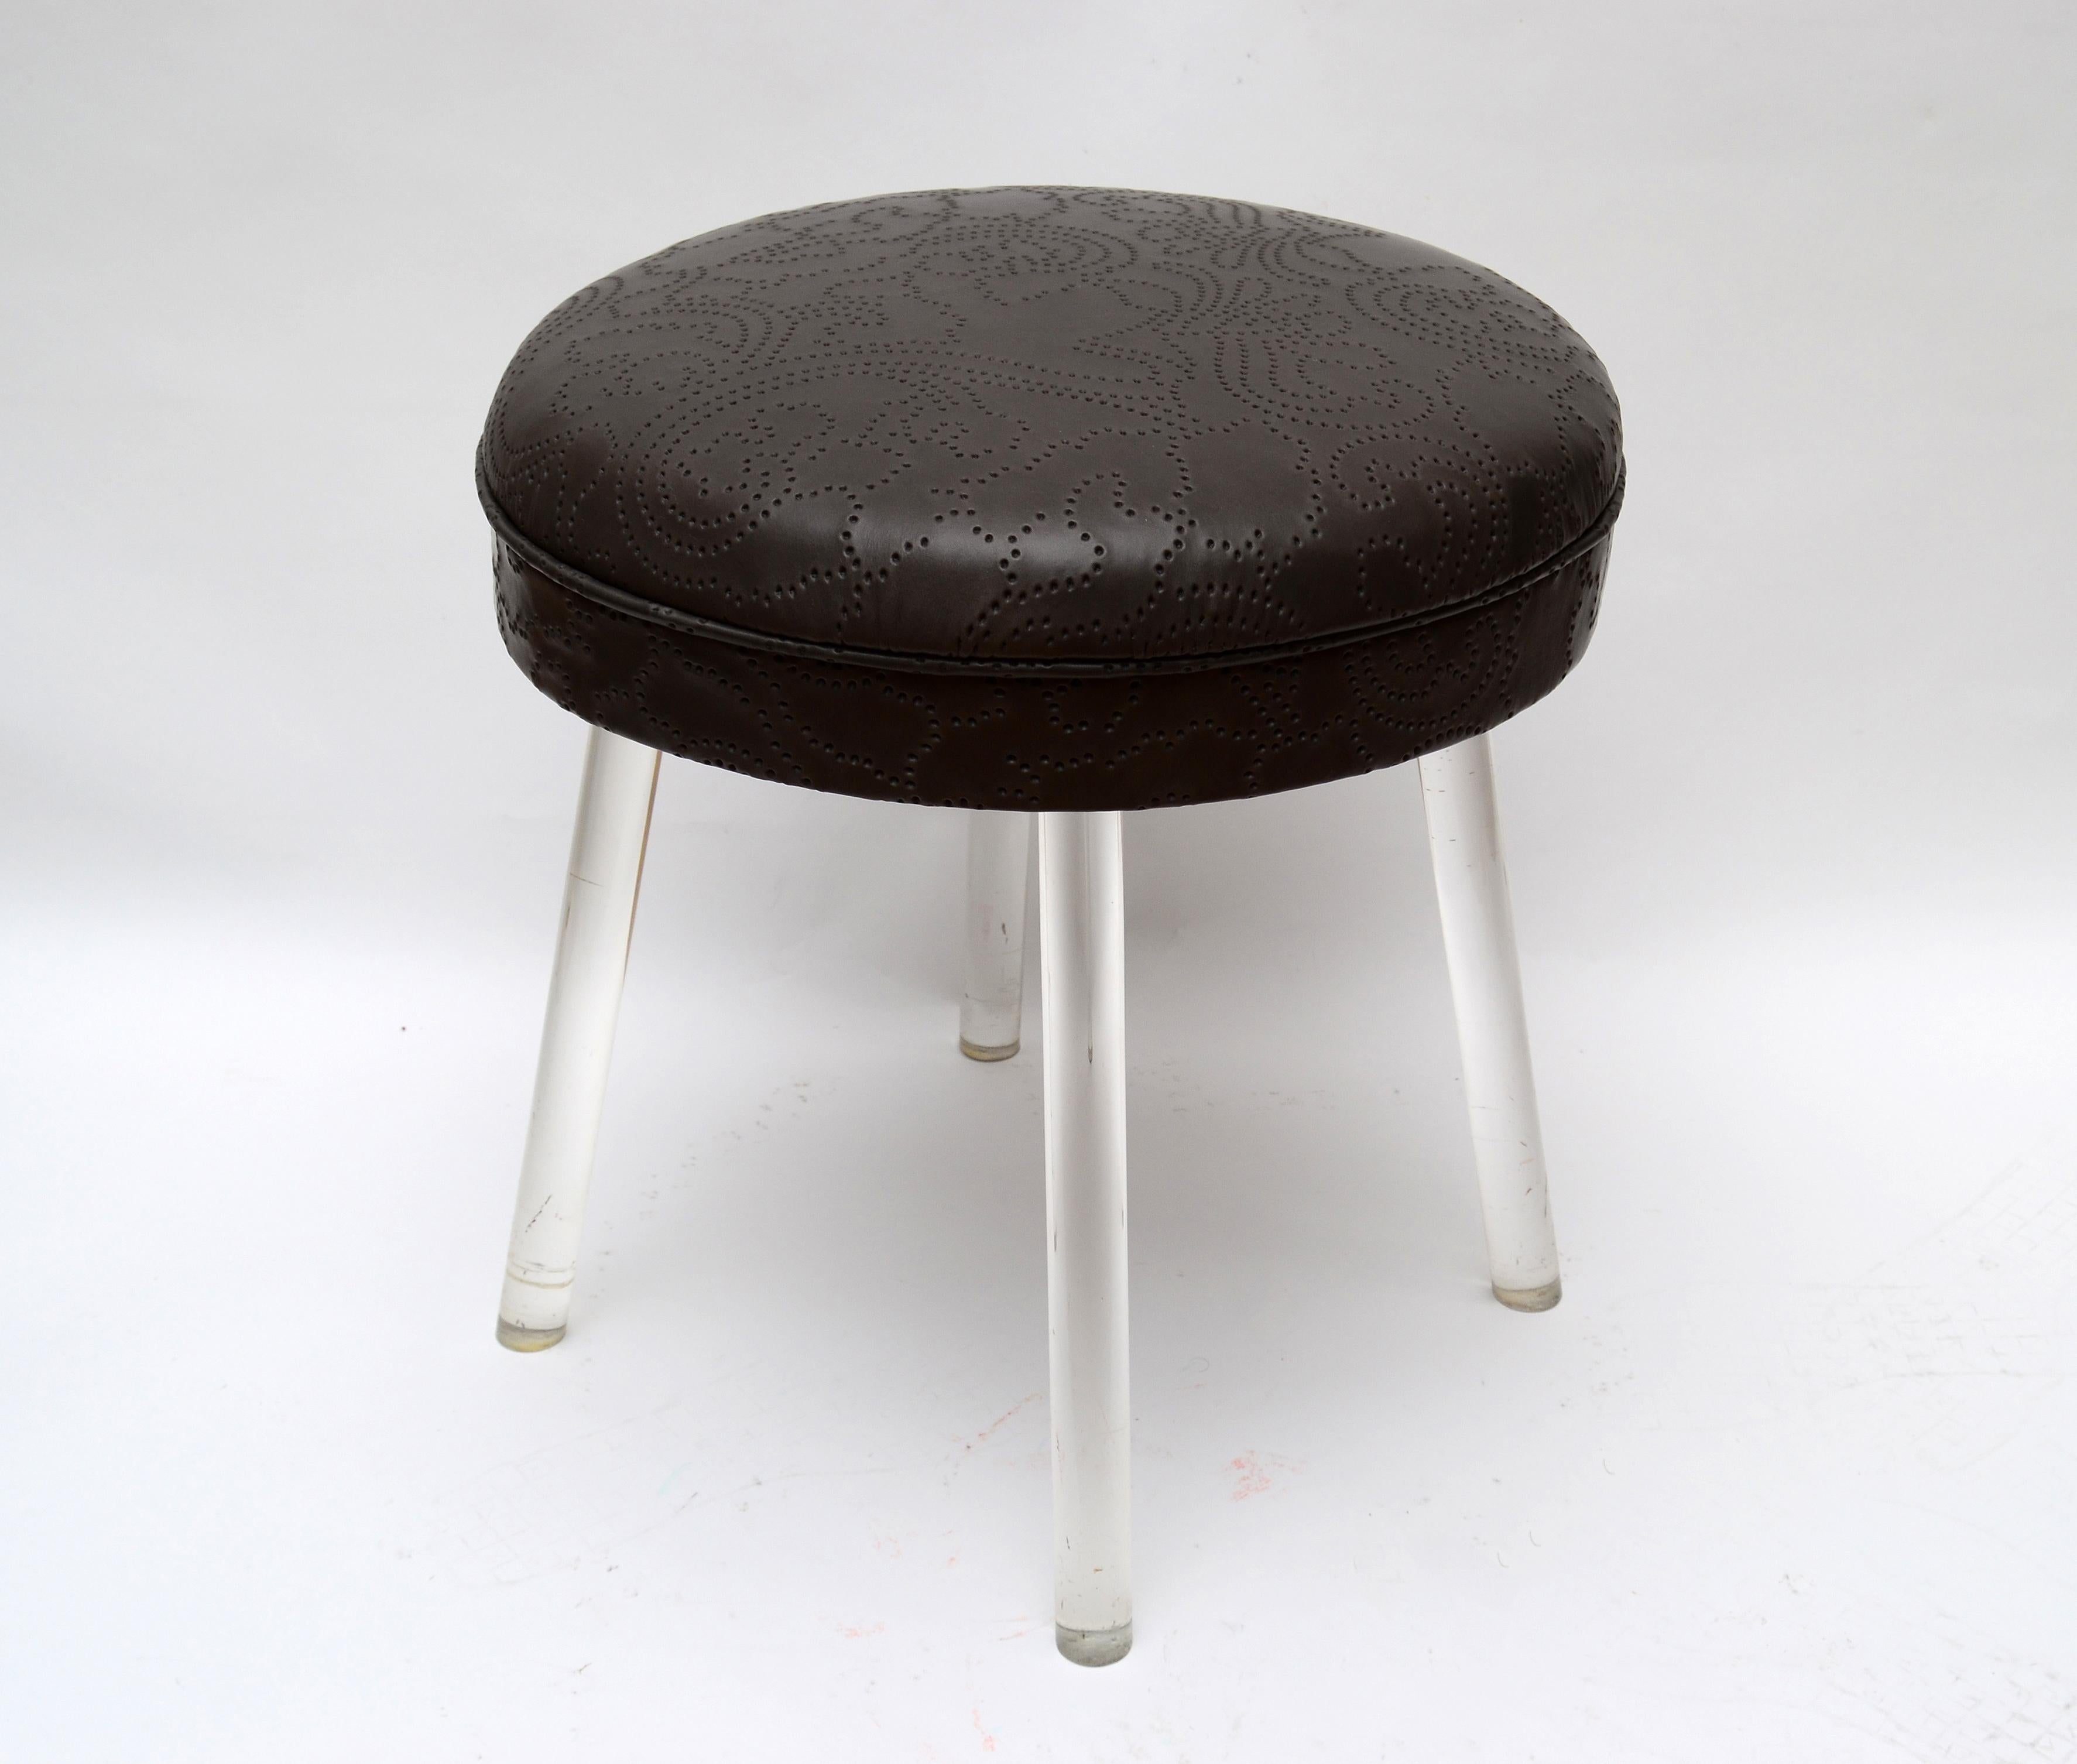 American Vintage Lucite Swivel Stool with Leather Seat